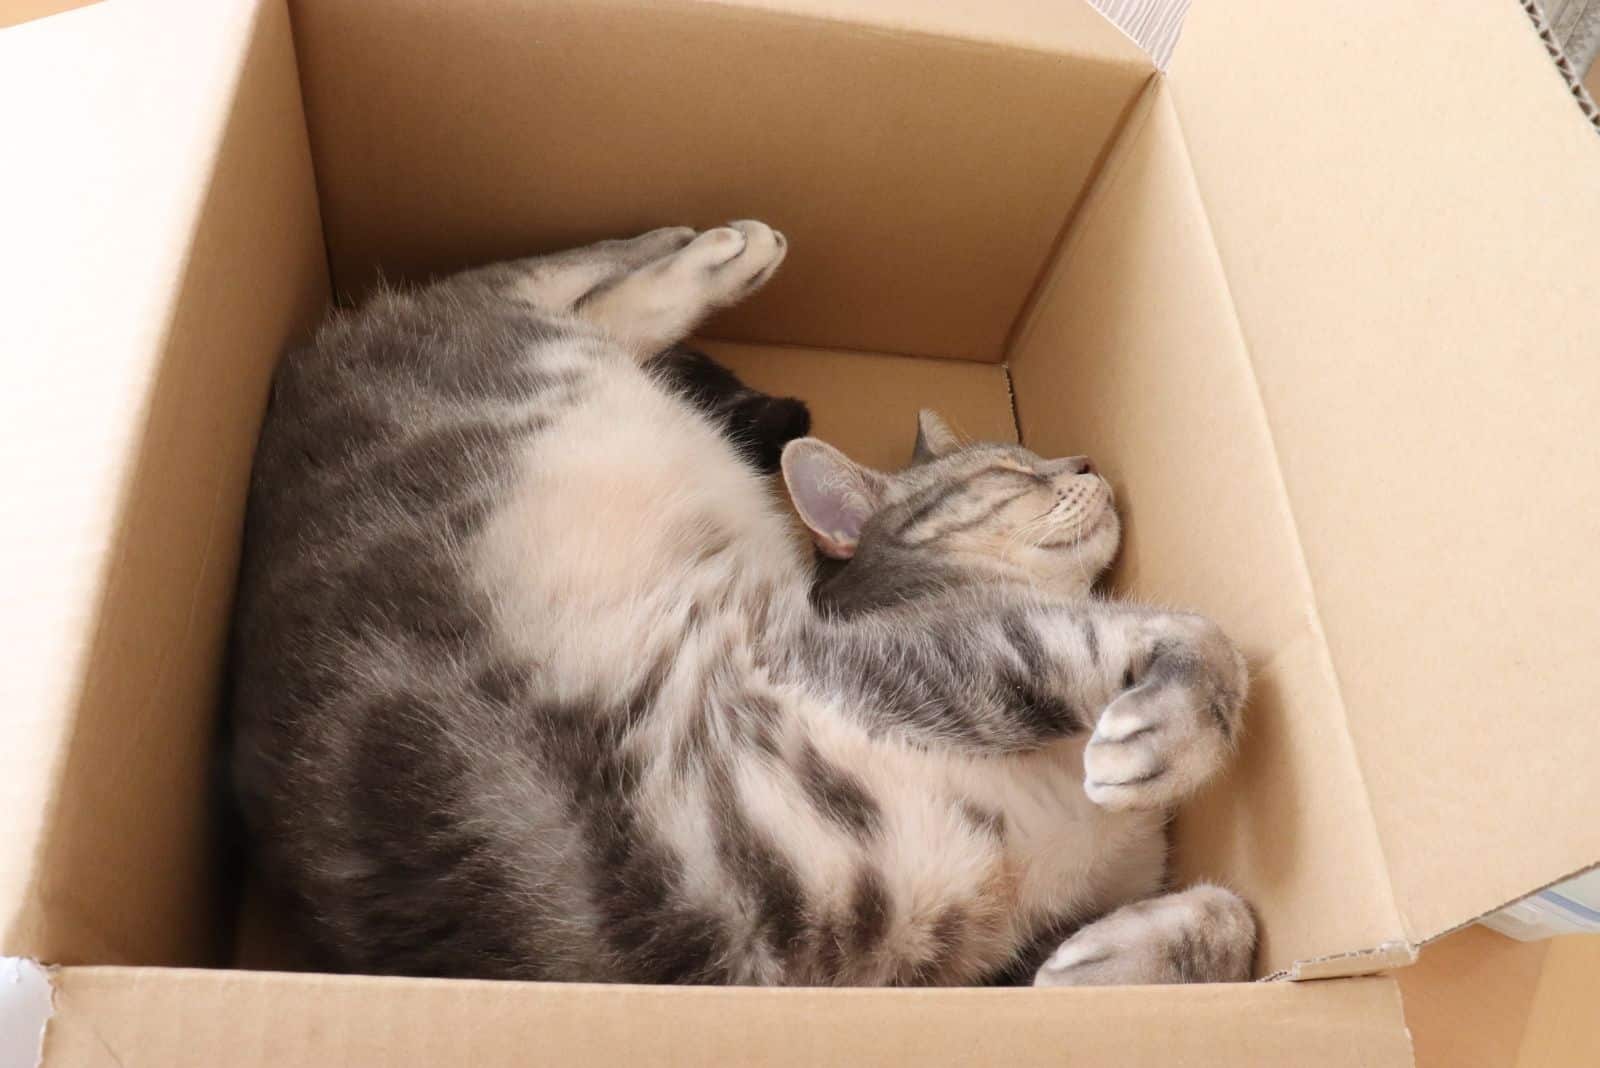 the cat stretches in the box